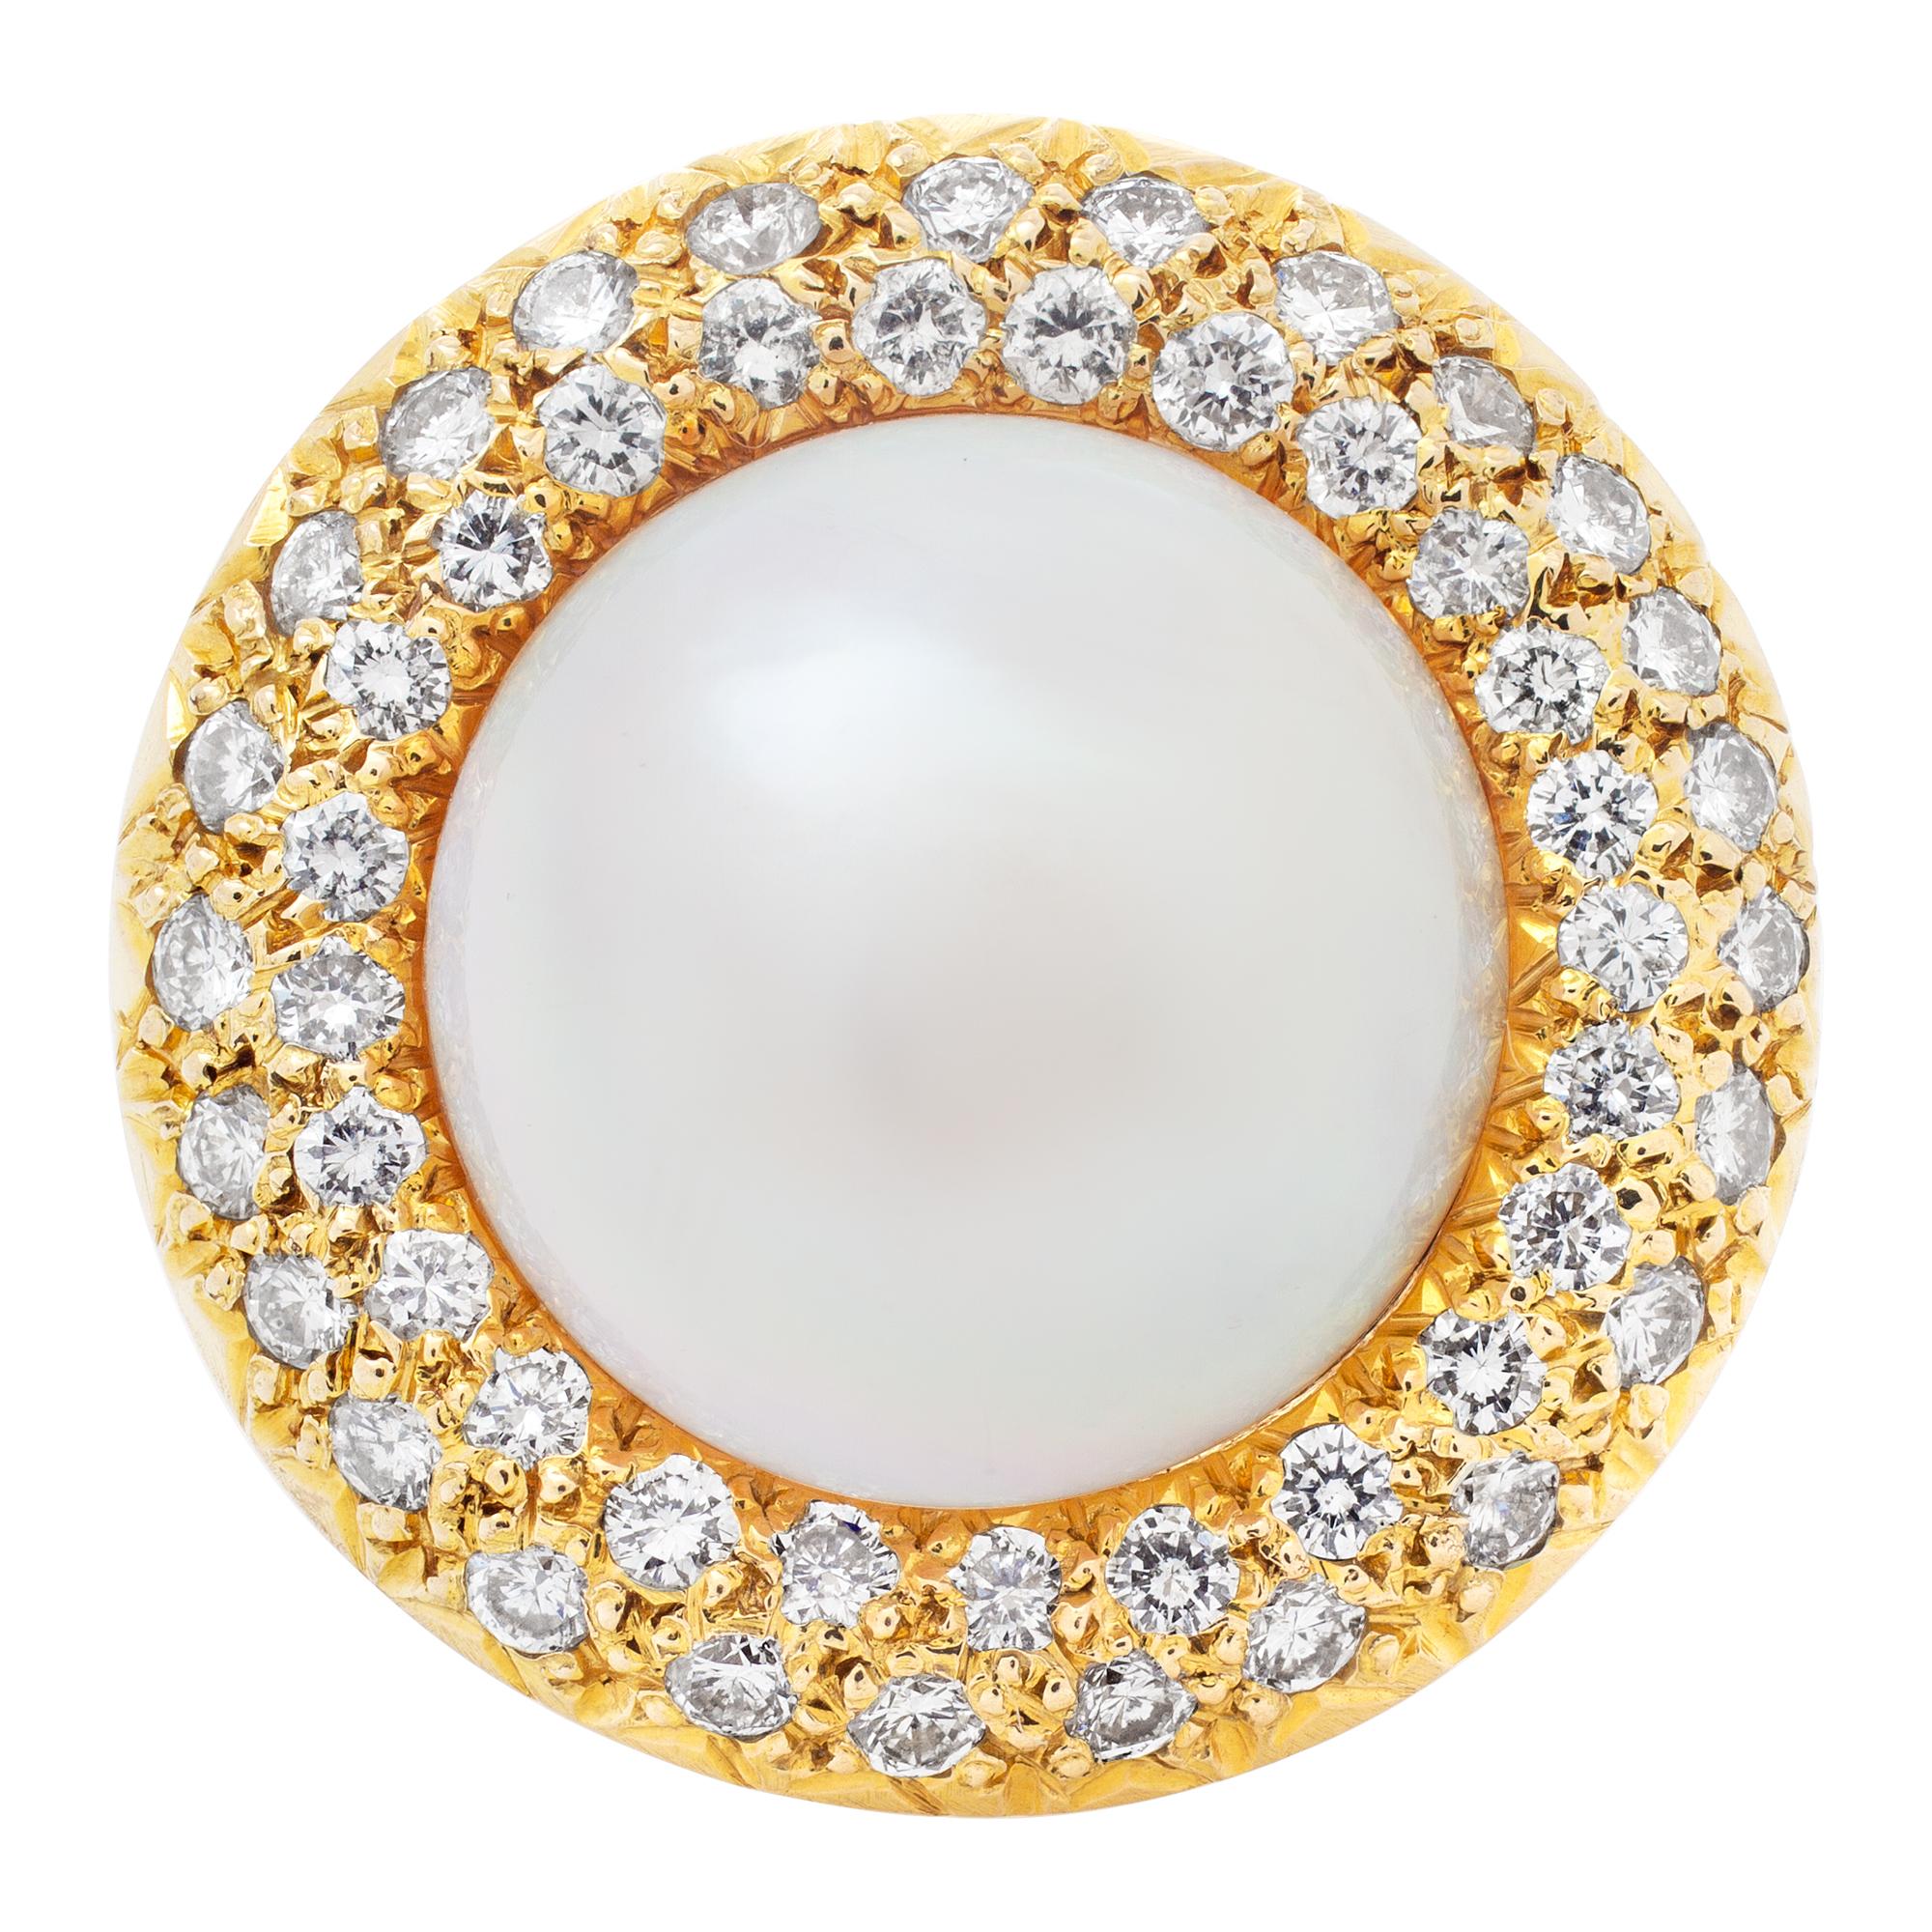 Mabe pearl ring with full cut round brilliant halo of diamonds set in 14k yellow gold.

This Pearl/diamond ring is currently size 4 and some items can be sized up or down, please ask! It weighs 0 gramms and is 14k.